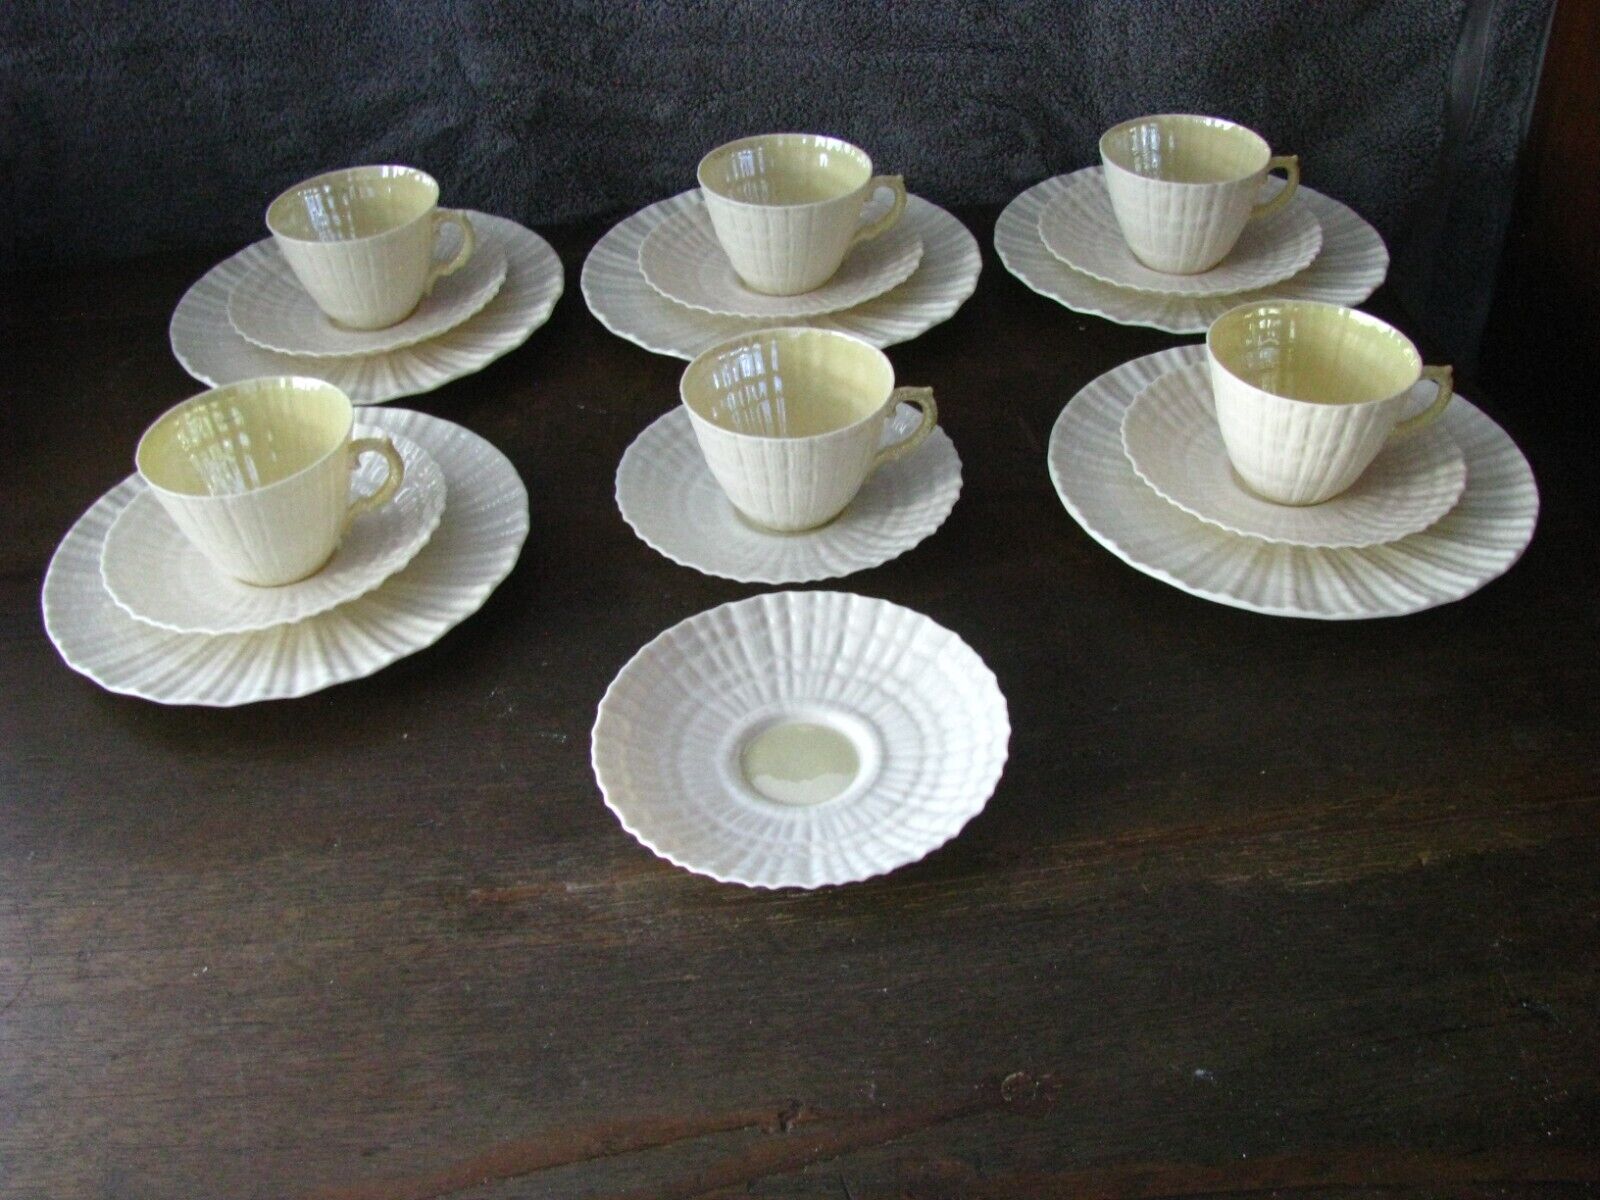 Belleek Limpet Cup & Saucer set with salad plates. 5th mark 1955-1965 yellow